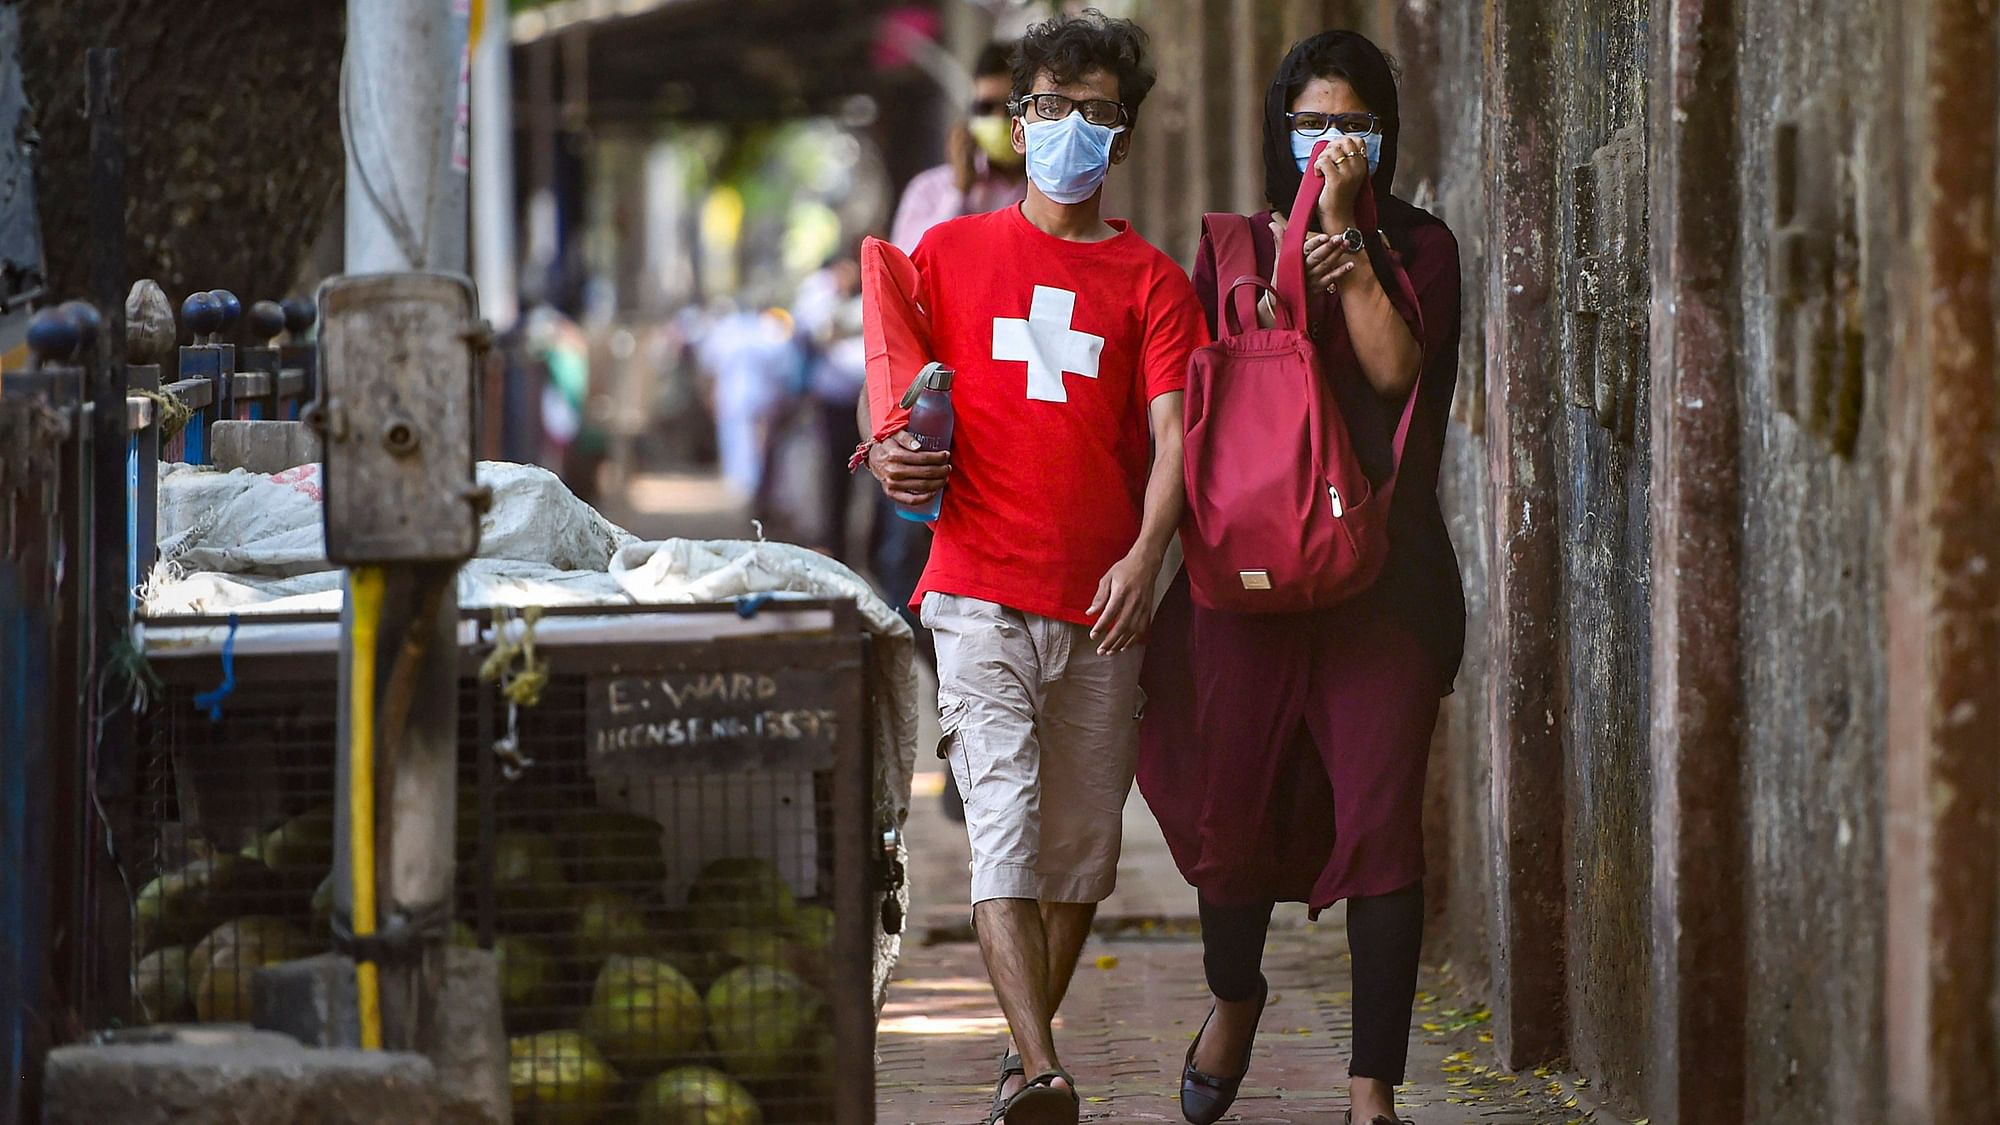 Not wearing a mask while stepping out of your house in Delhi may land you in jail for up to six months, according to an order issued by Chief Secretary Vijay Dev to contain the spread of the contagious coronavirus disease.